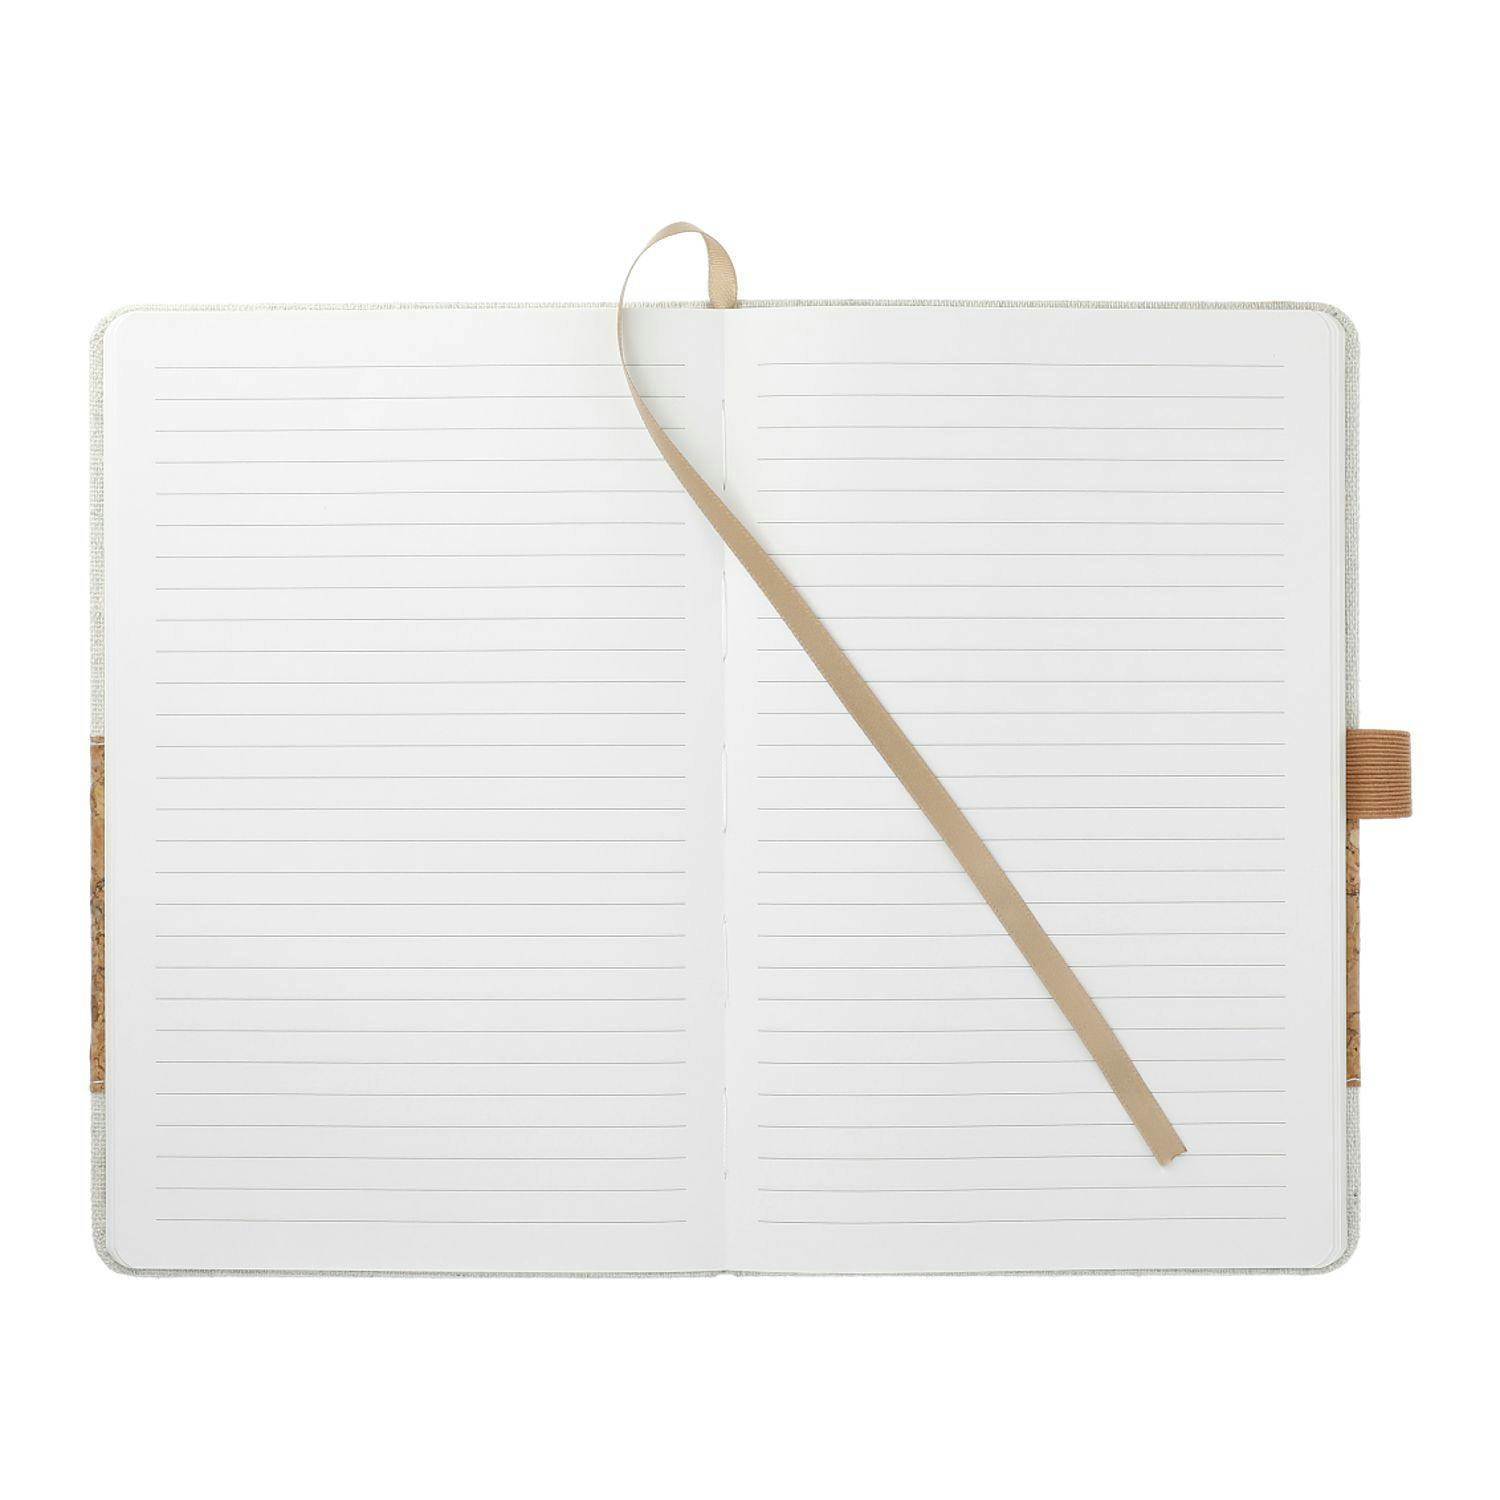 5.5" x 8.5" Recycled Cotton and Cork Bound Notebook - additional Image 3